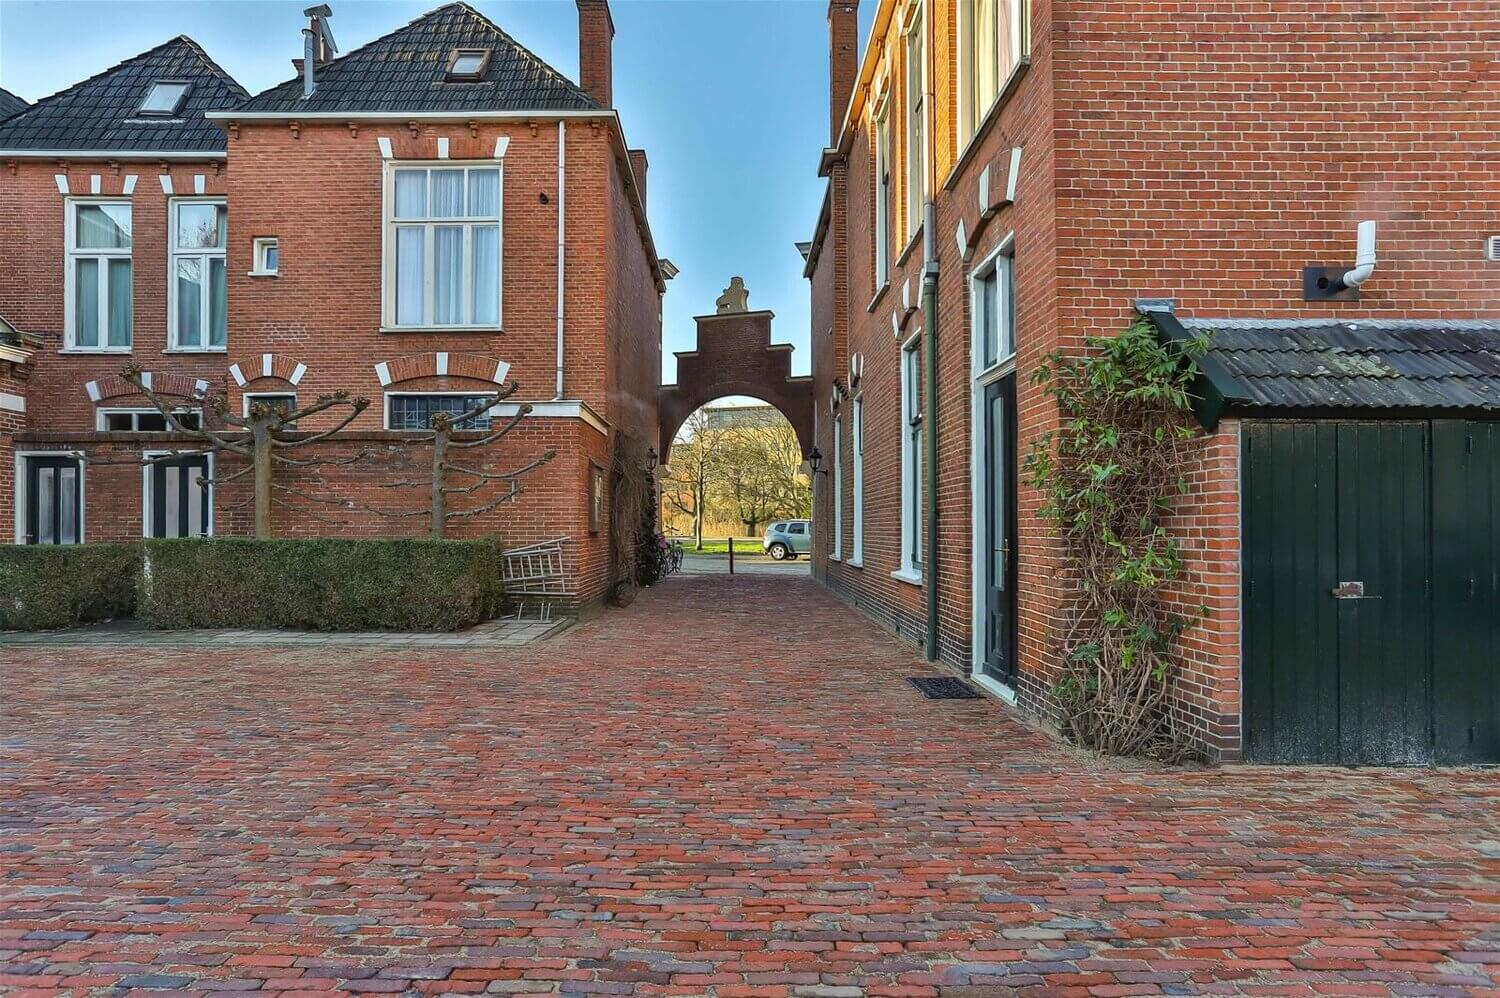 cozy courtyard house historic charm netherlands nordroom18 A Cozy Courtyard House Packed With Historic Charm